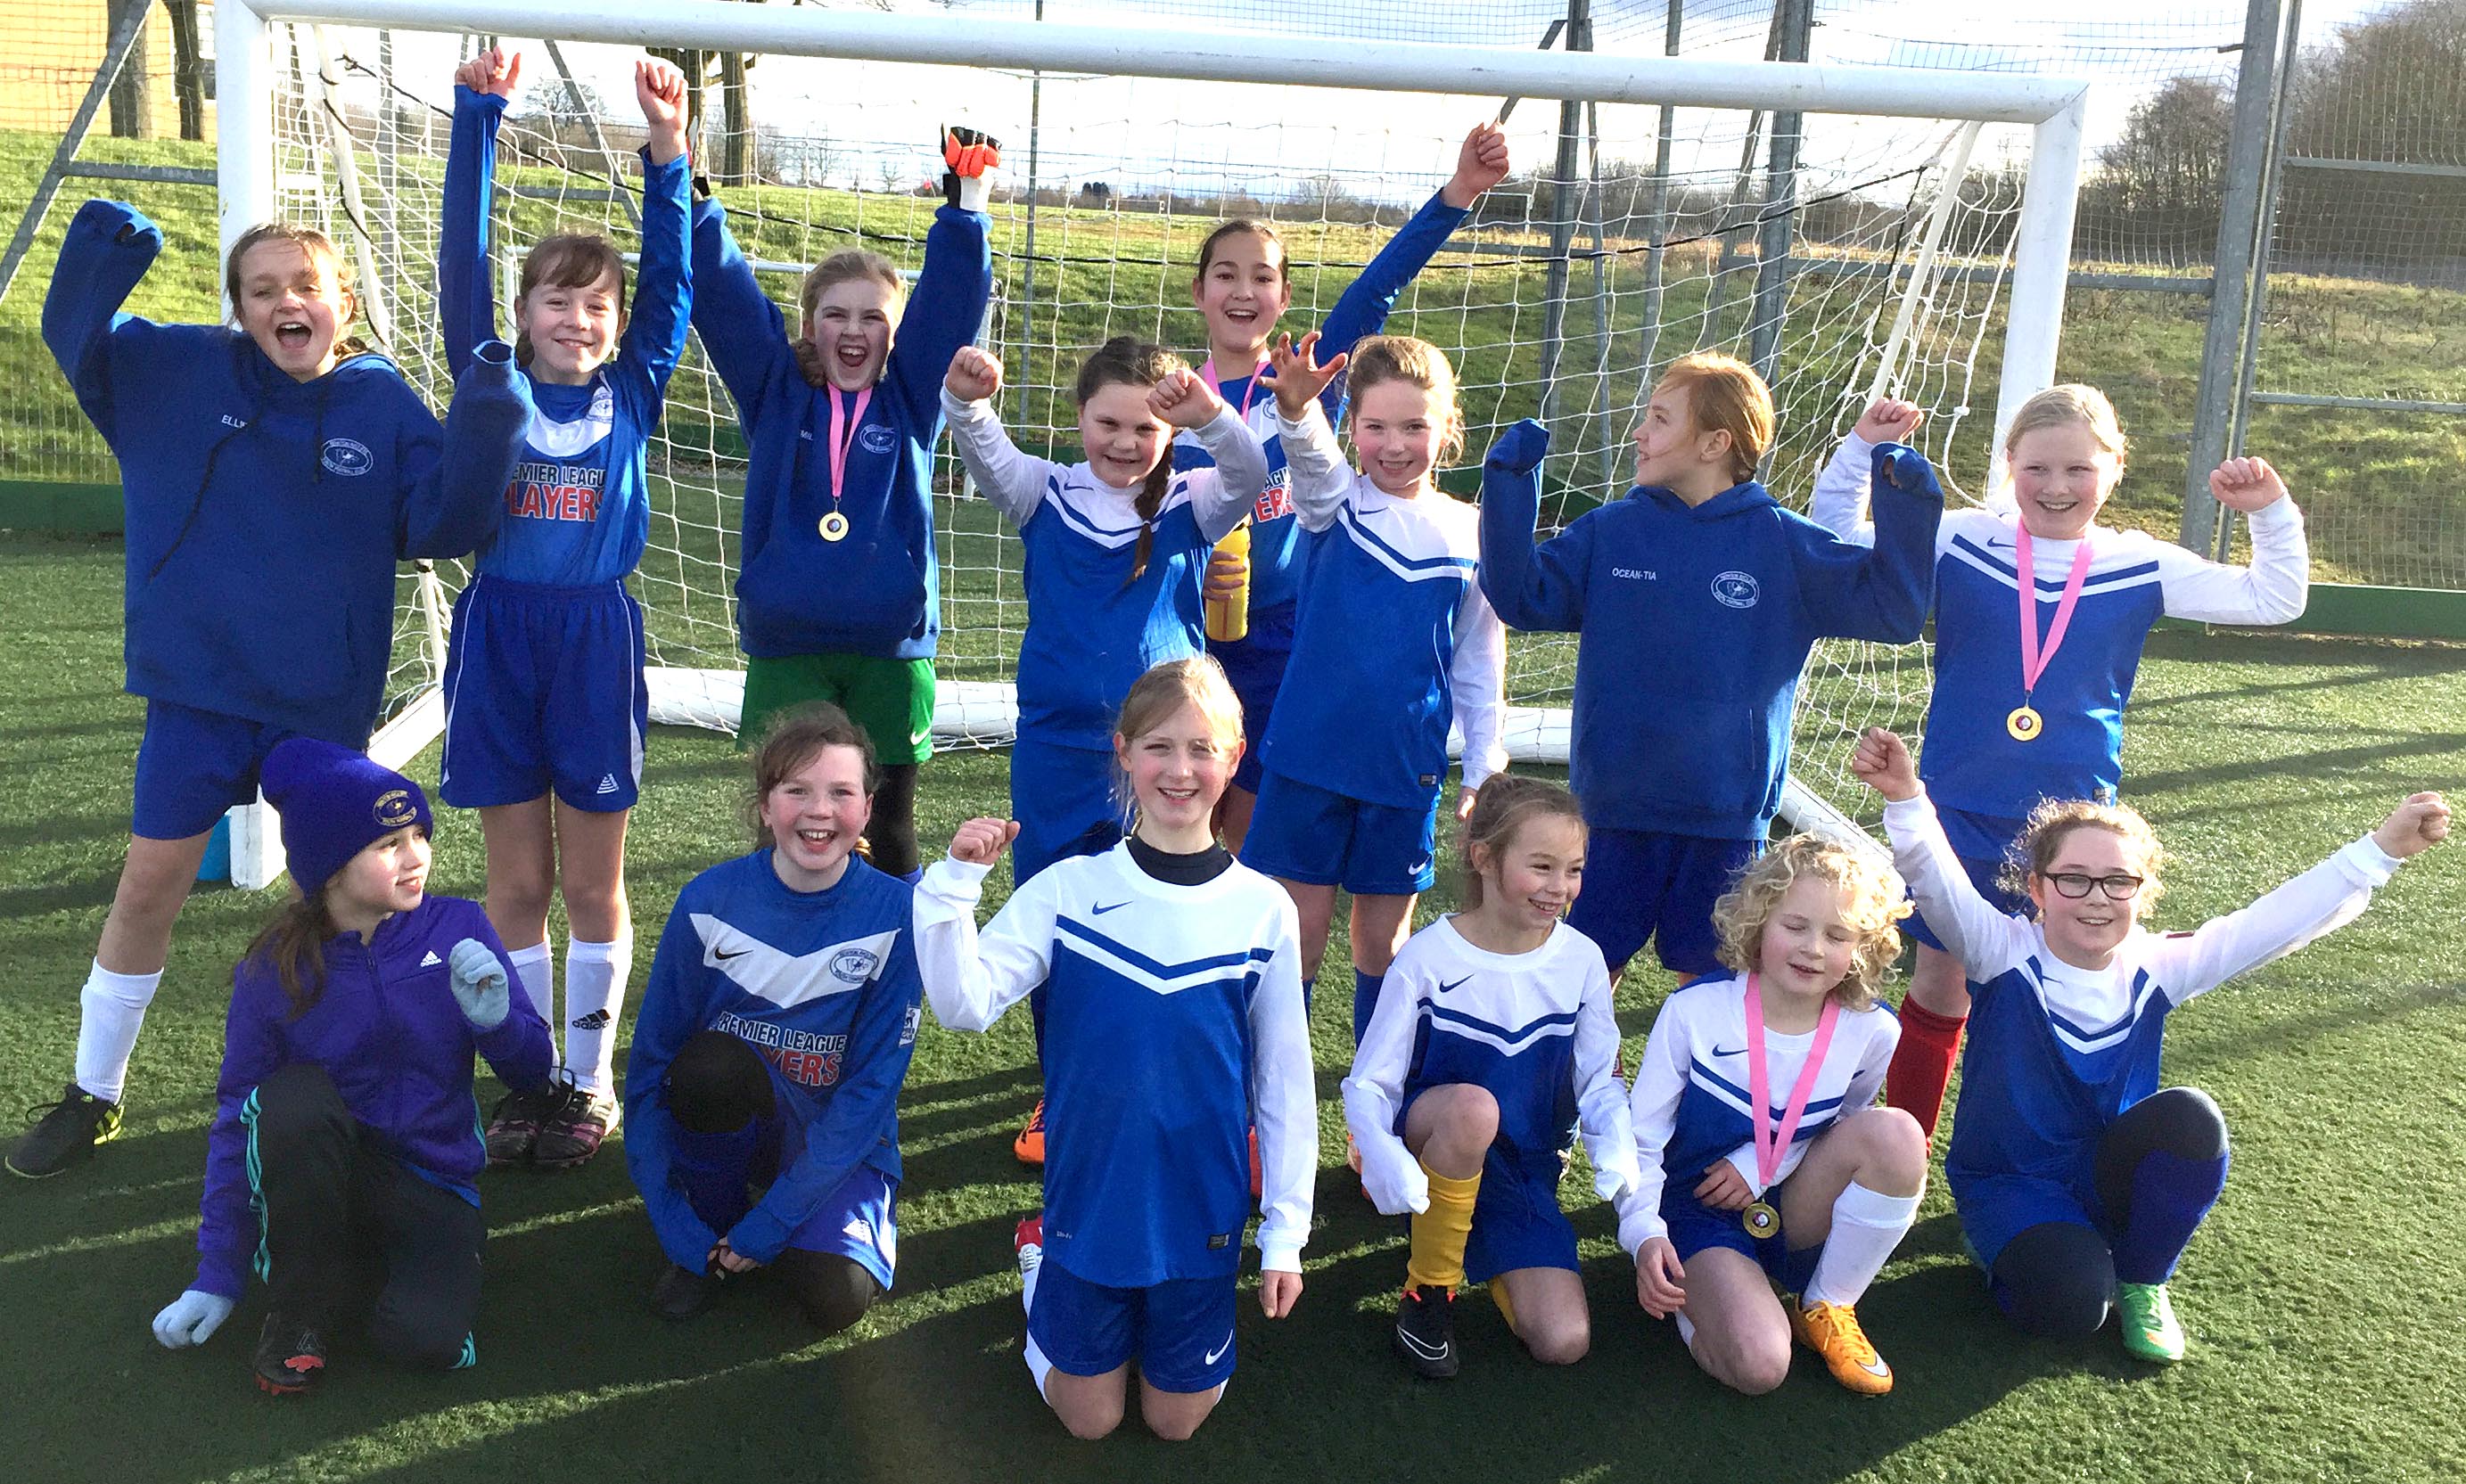 More Girls’ Football Teams Formed in Aycliffe